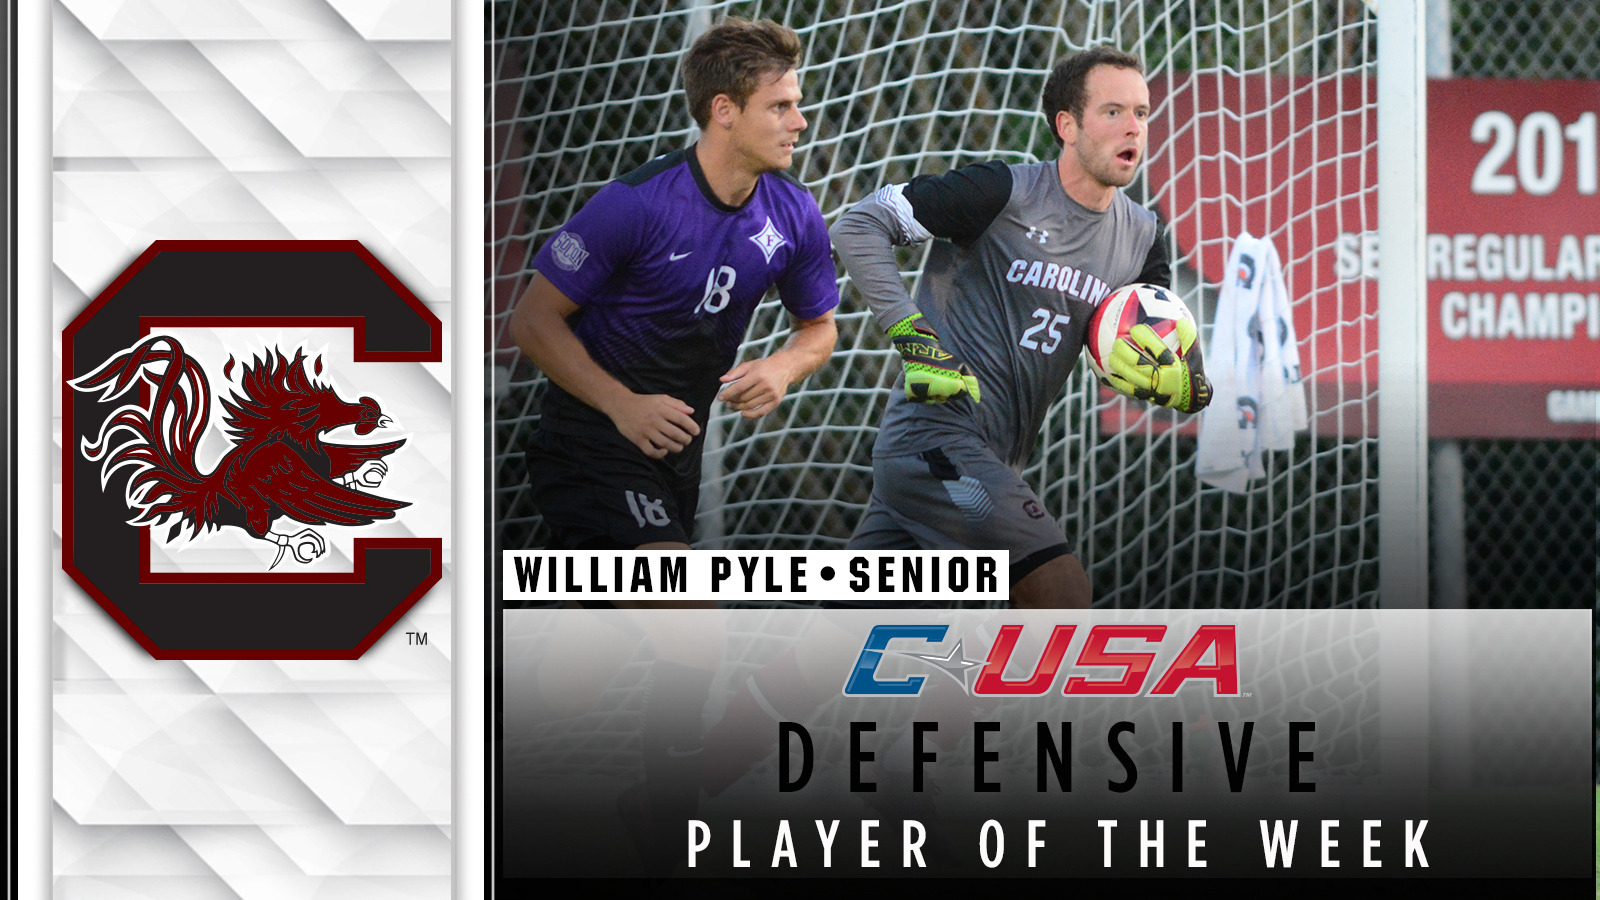 Pyle Named C-USA Defensive Player of the Week